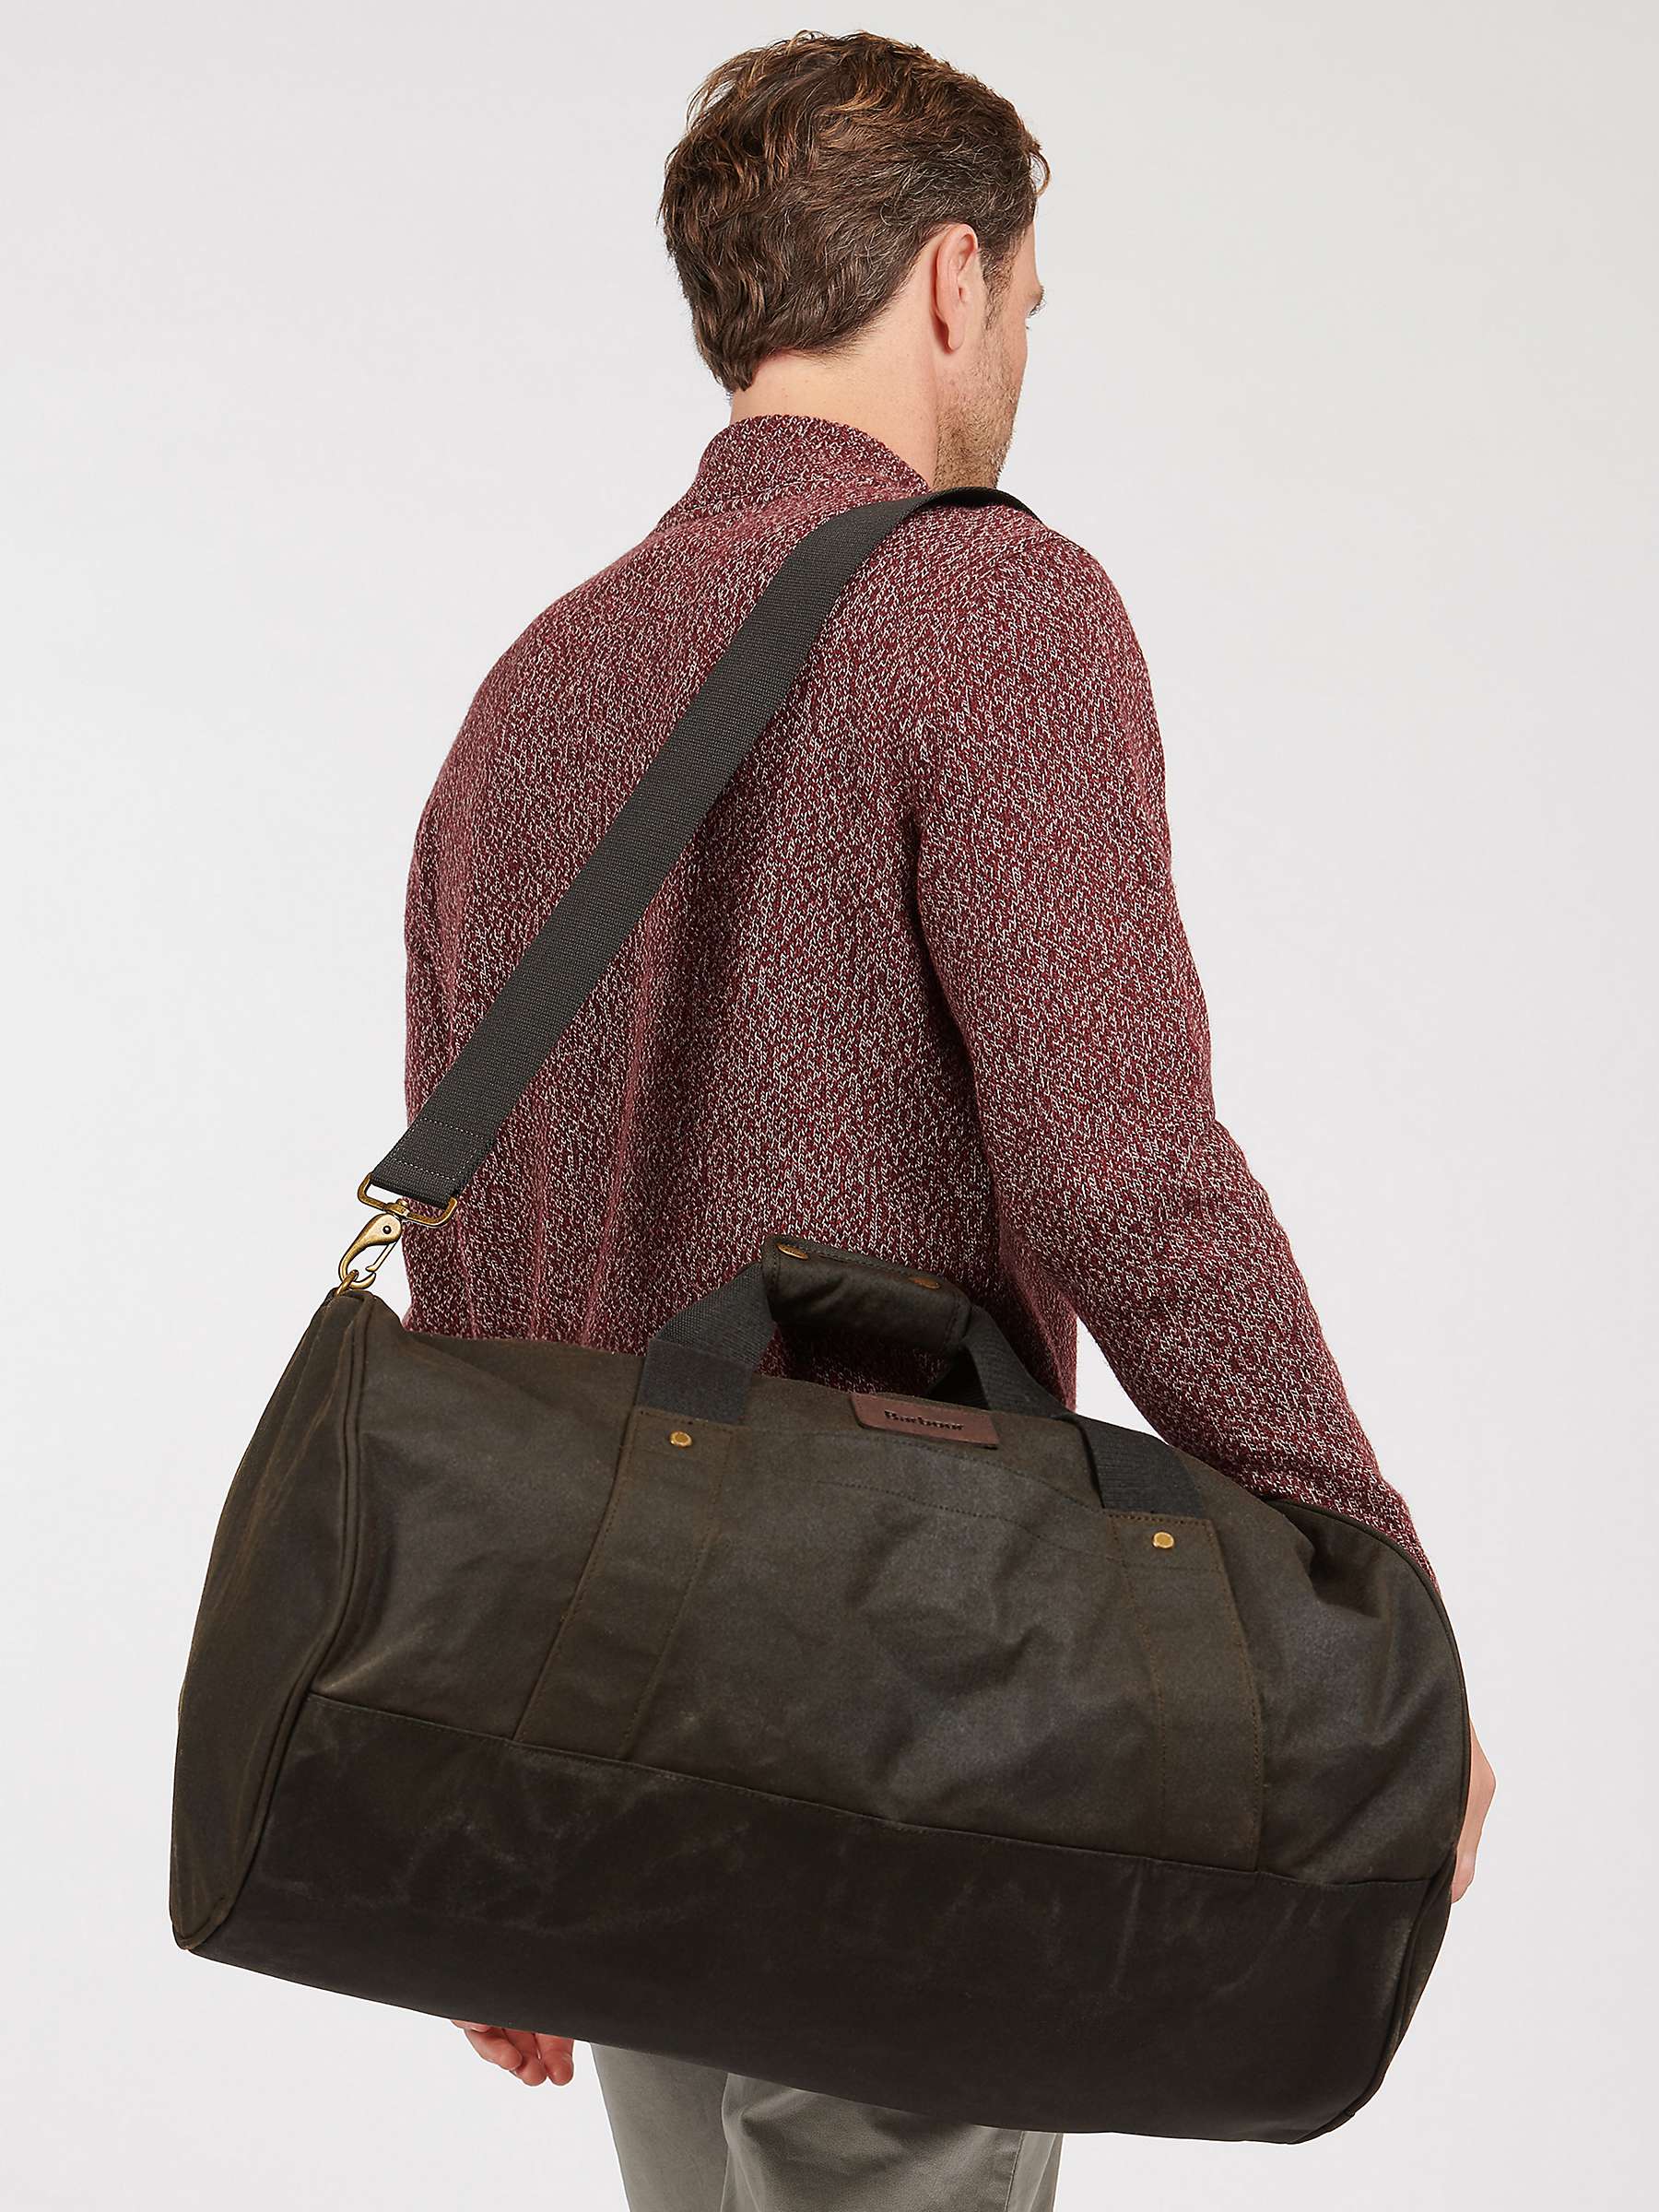 Buy Barbour Barrell Wax Cotton Holdall Online at johnlewis.com